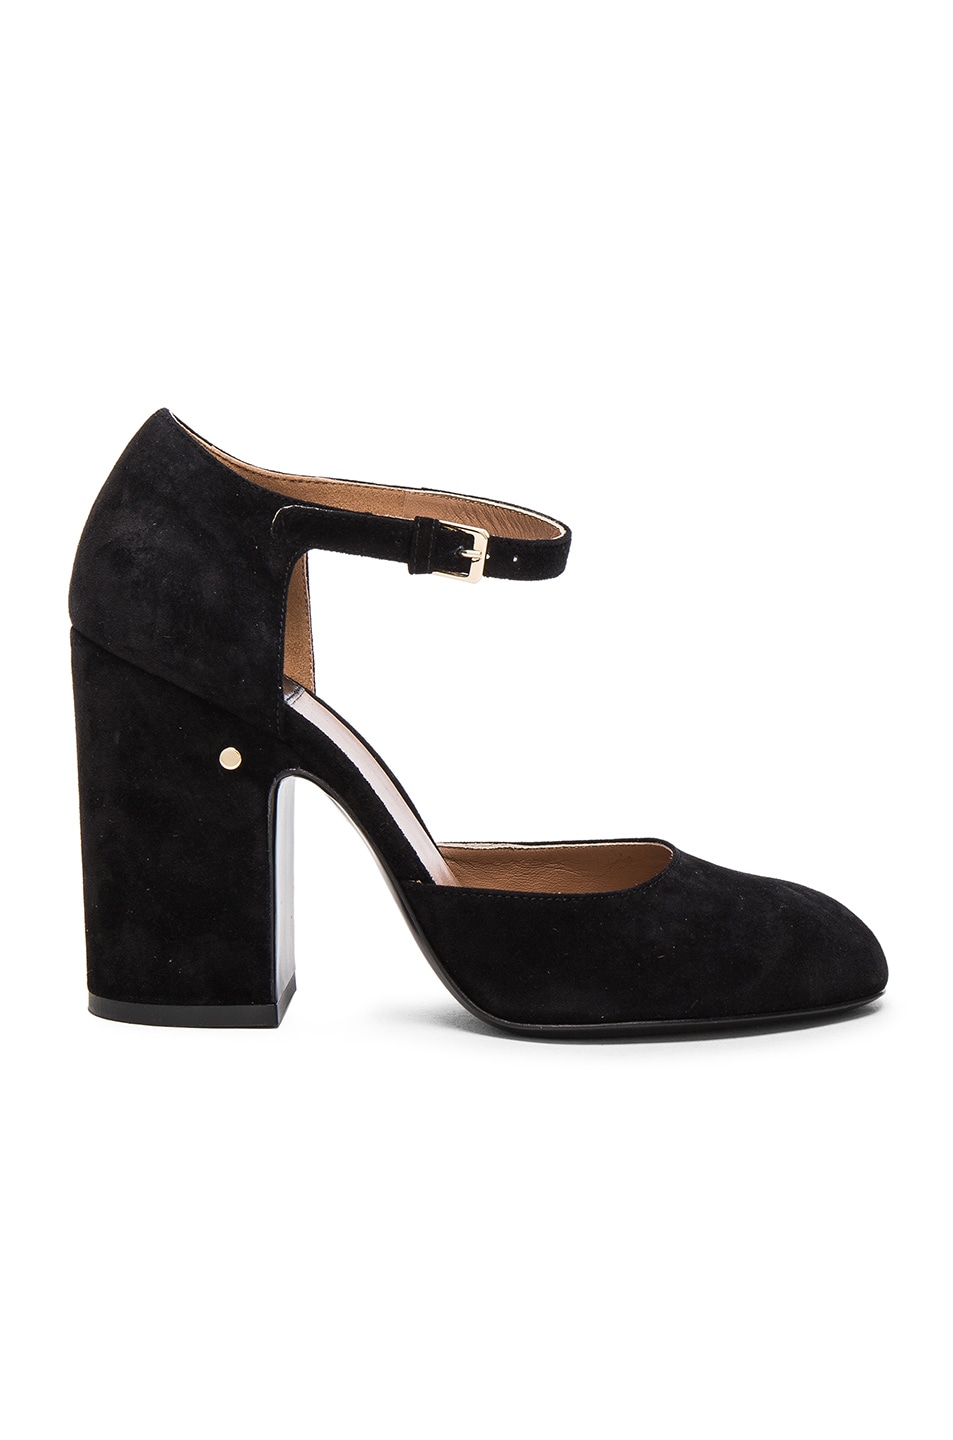 LAURENCE DACADE Mindy Suede D'Orsay Ankle-Wrap Pump, Black | ModeSens